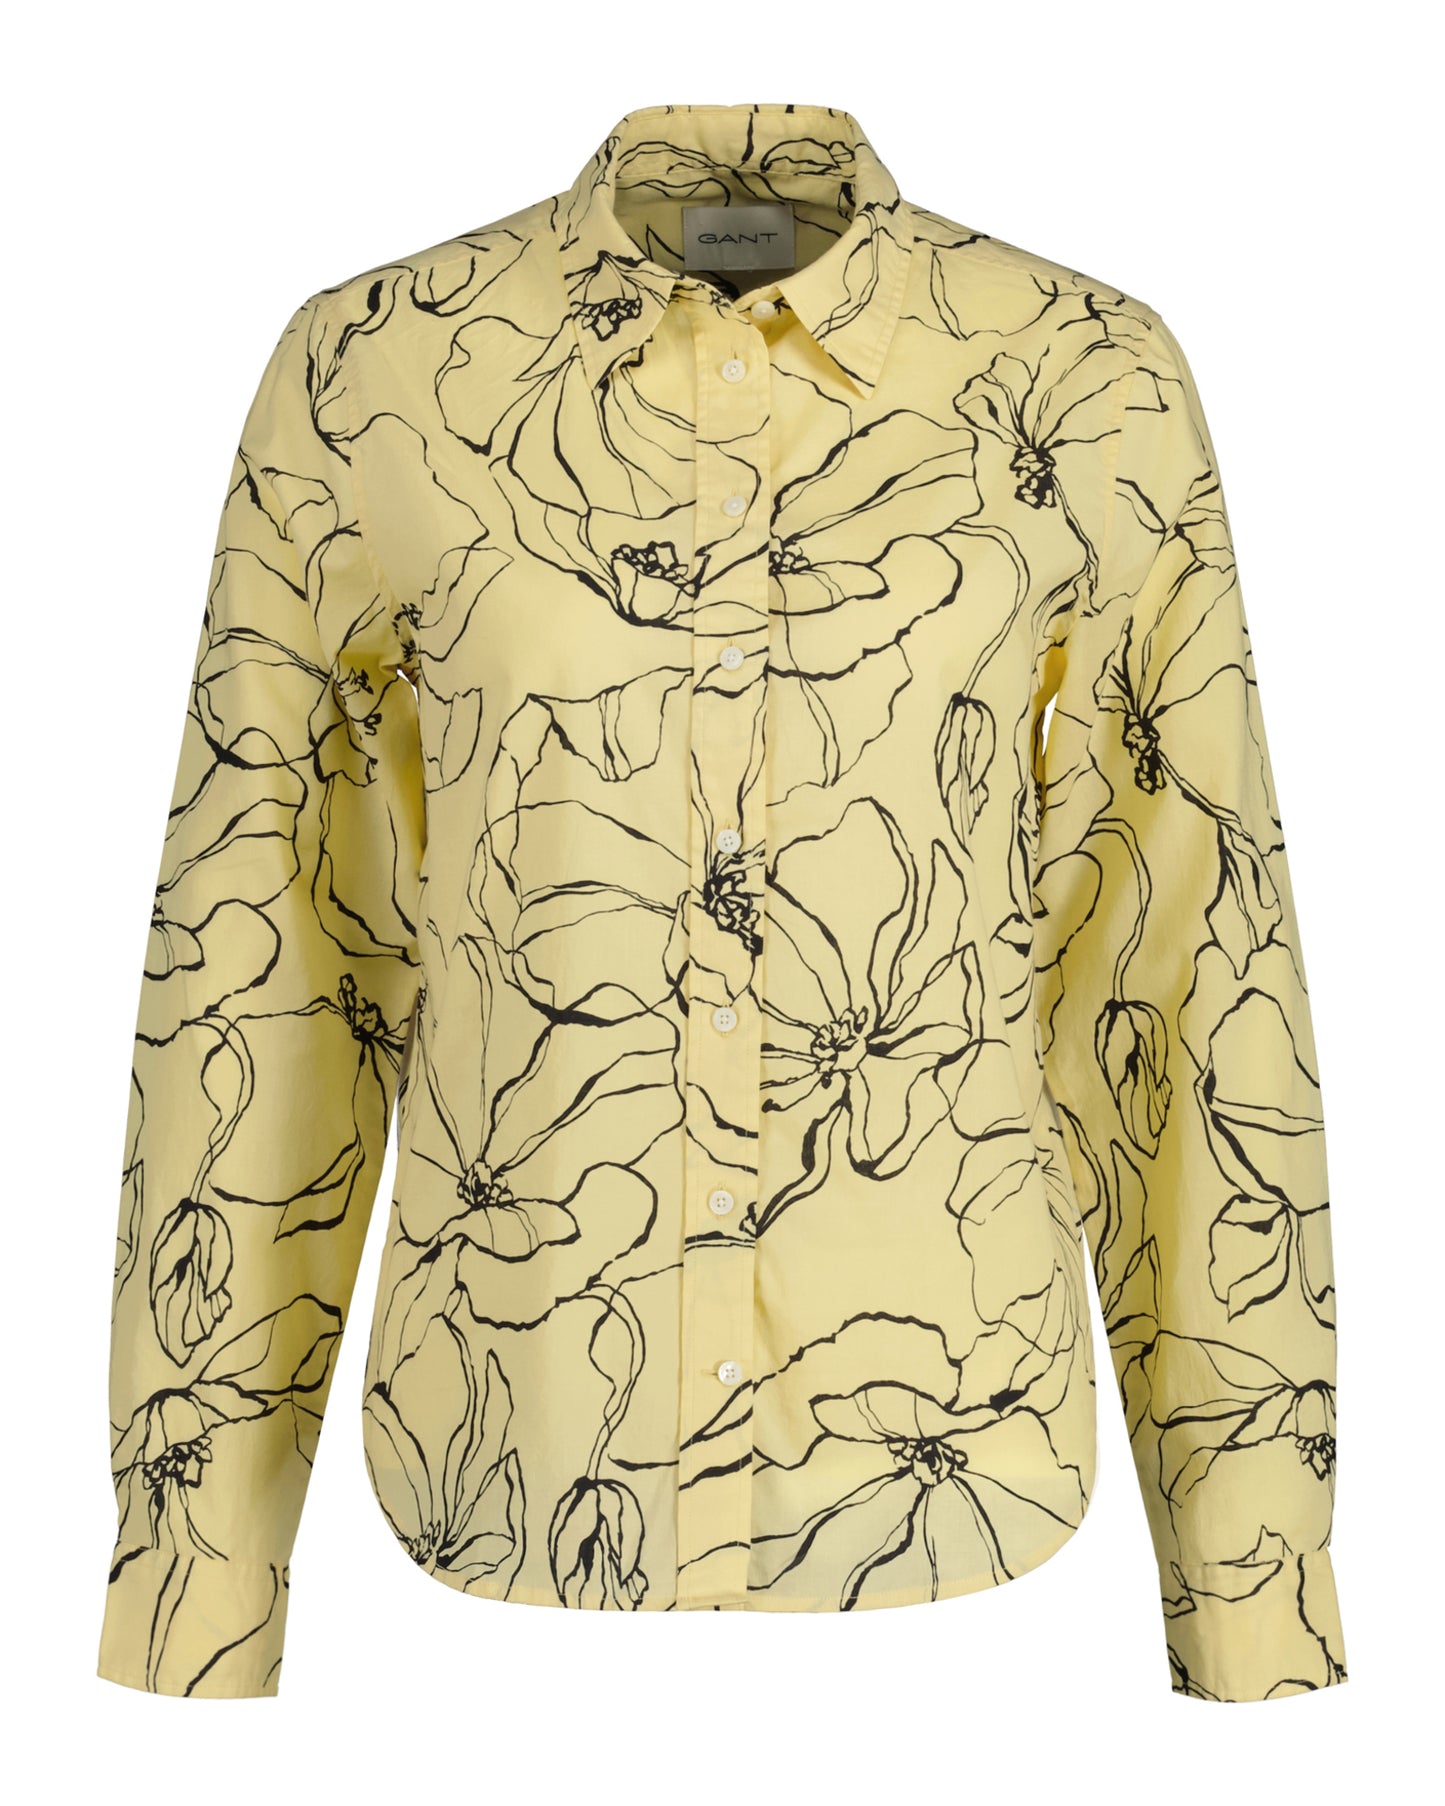 Regular Fit Line Drawing Cotton Voile Shirt - Dusty Light Yellow